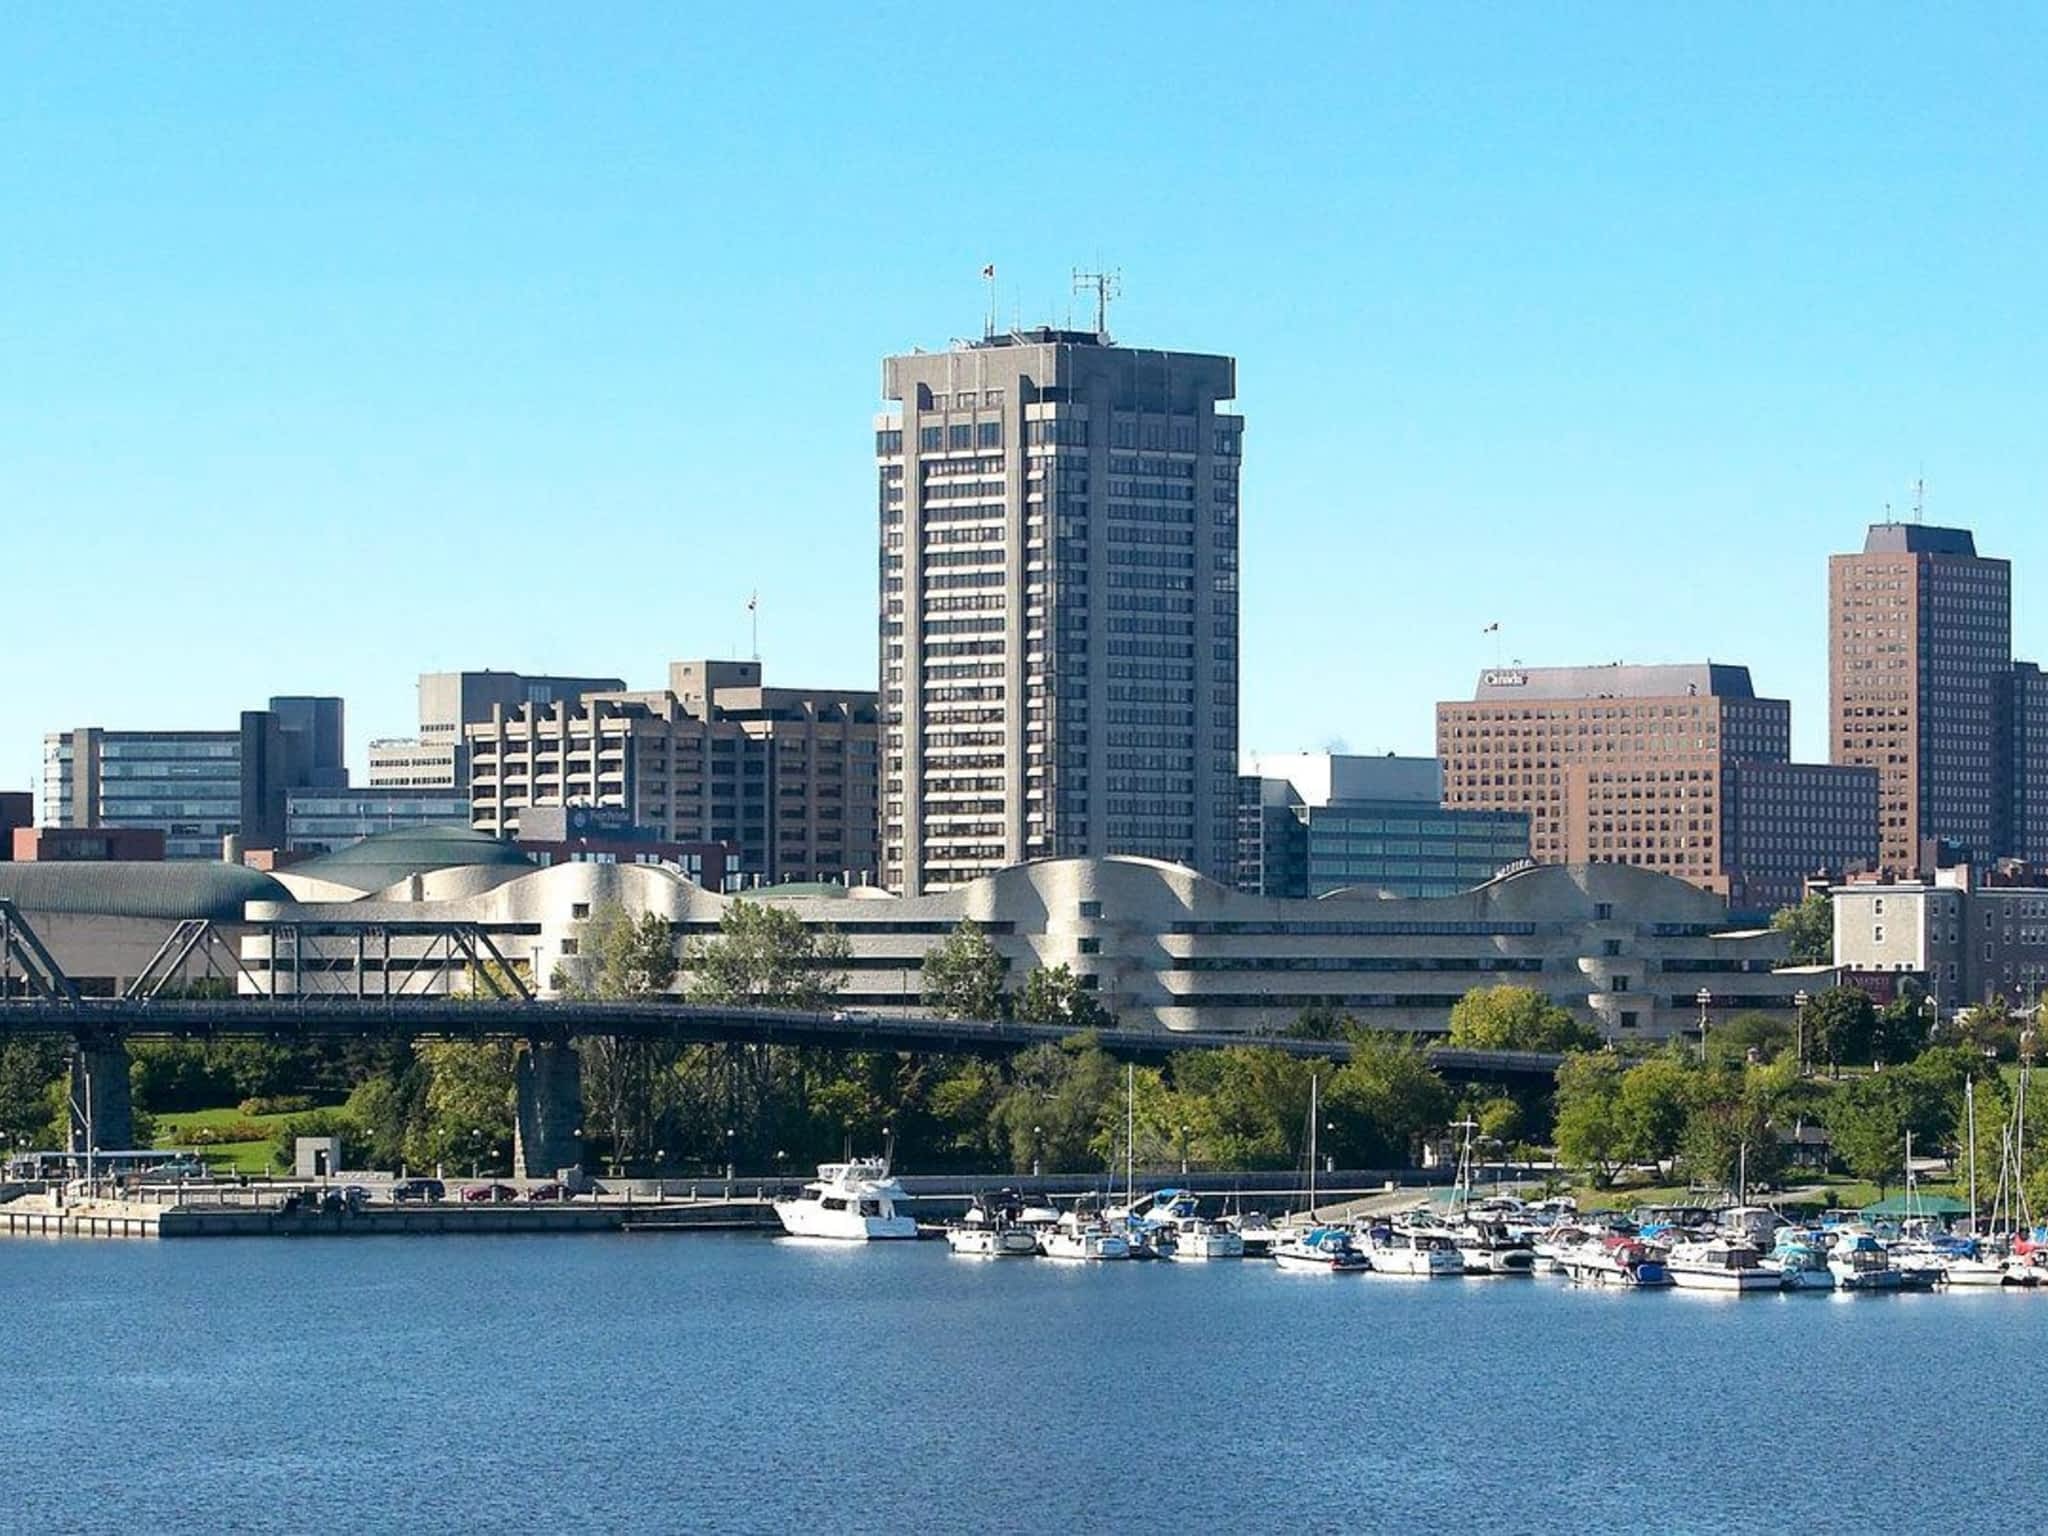 photo Four Points by Sheraton Hotel & Conference Centre Gatineau-Ottawa